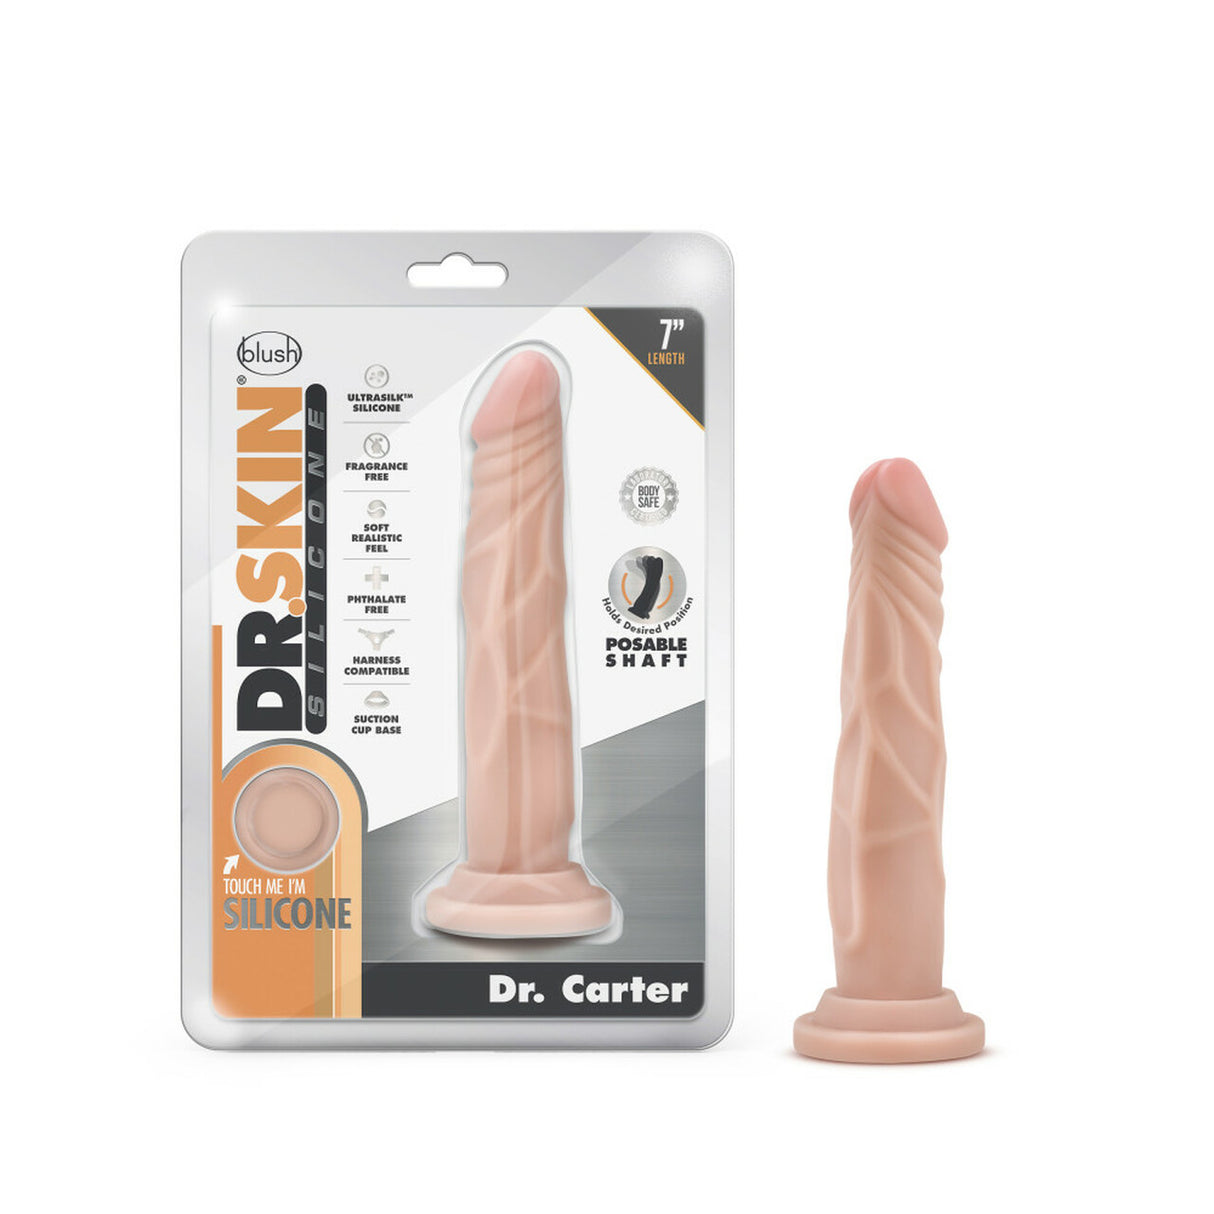 Dr Skin Silicone Dr Carter 7 In Vanilla Intimates Adult Boutique